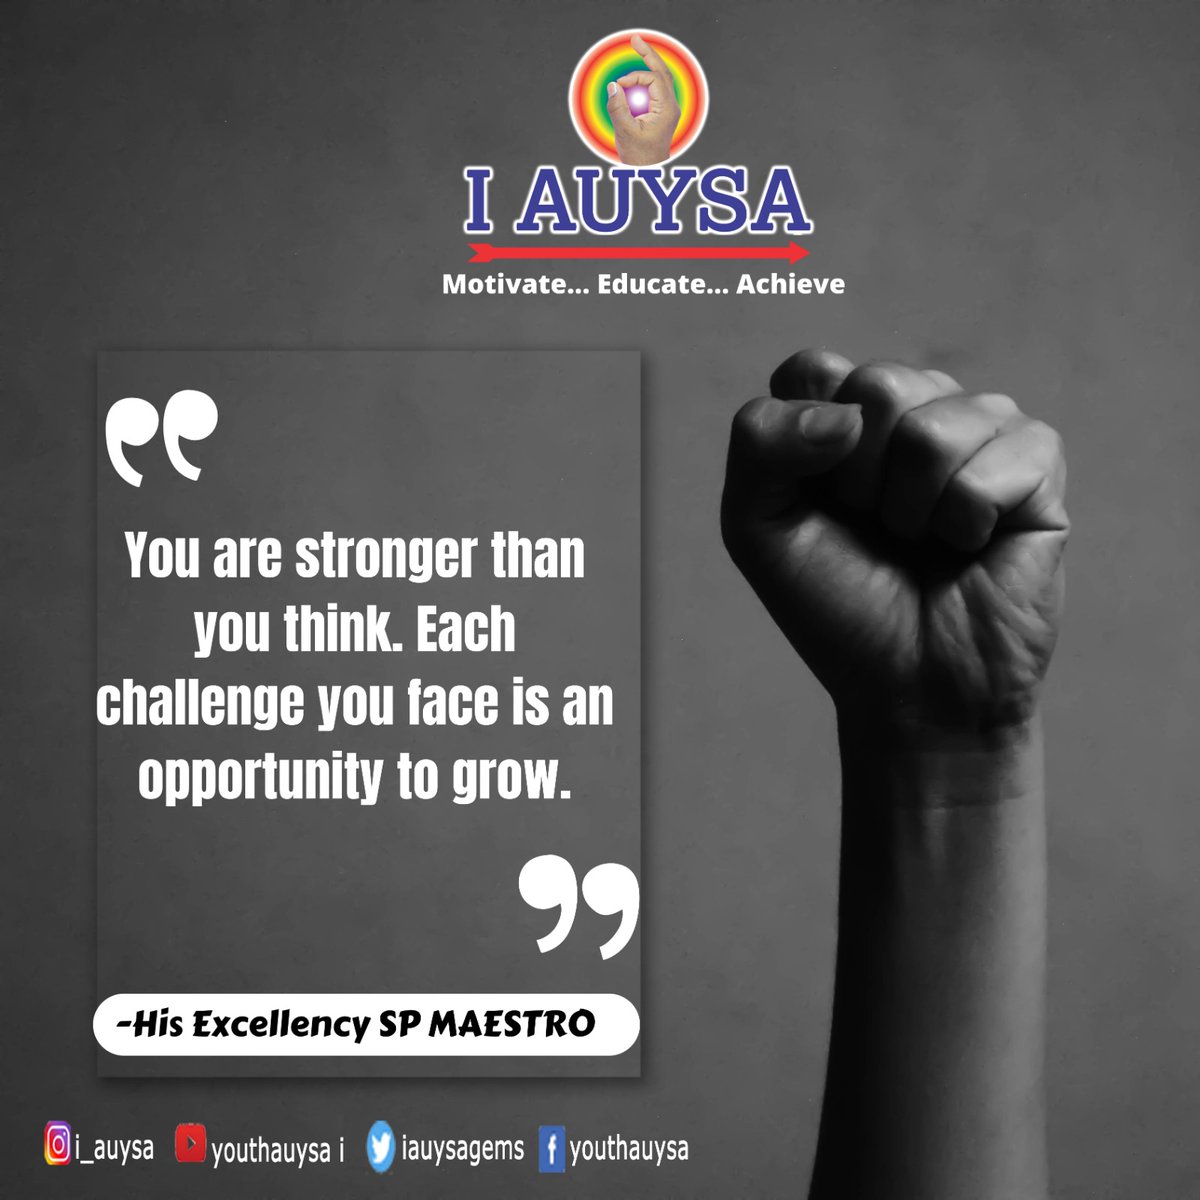 #iauysa #iauysagems #spmaestro #hisexcellencyspmaestroquotes #youth #perfect #success #motivation #quotes #life #change #personalitydevelopment #thoughts #actions #positive #criticism